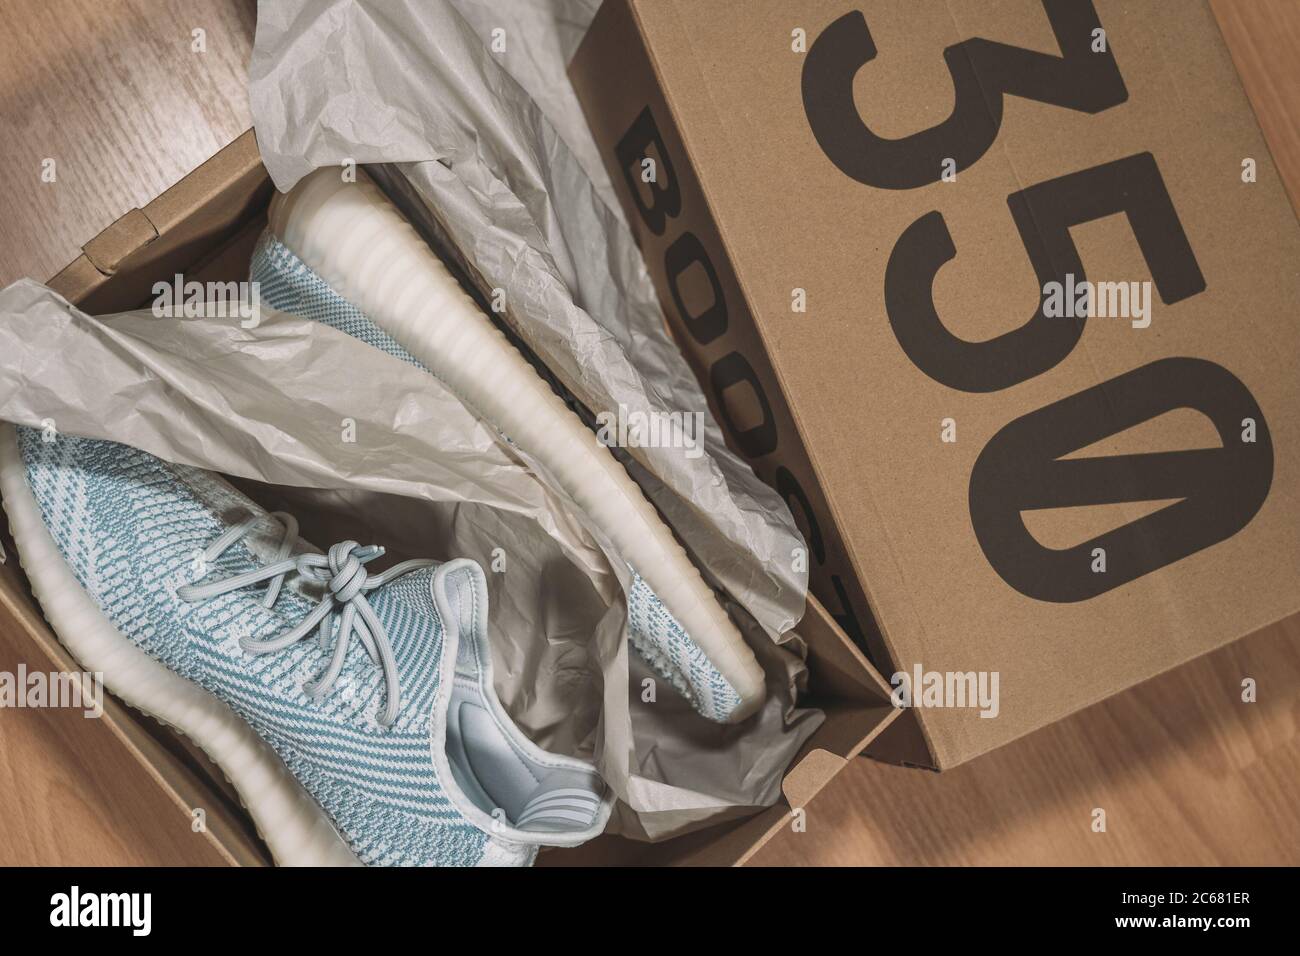 Moscou, Russie - juin 2020 : Adidas Yeezy Boost 350 V2 - Famous Limited Collection Fashion Sneakers par Kanye West et Adidas collaboration. Banque D'Images